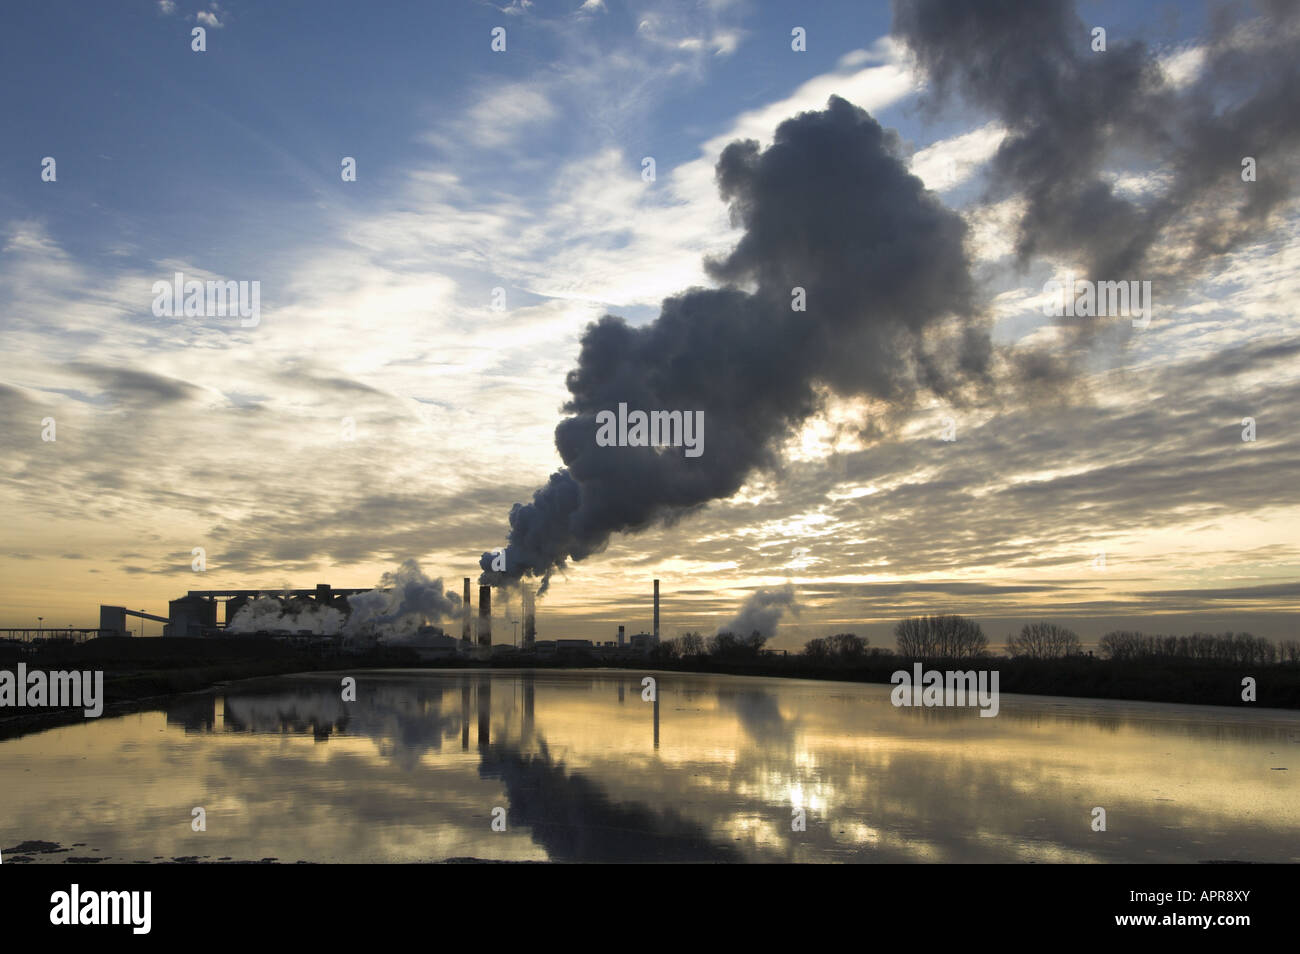 Norfolk sugar factory High Resolution Stock Photography and Images - Alamy